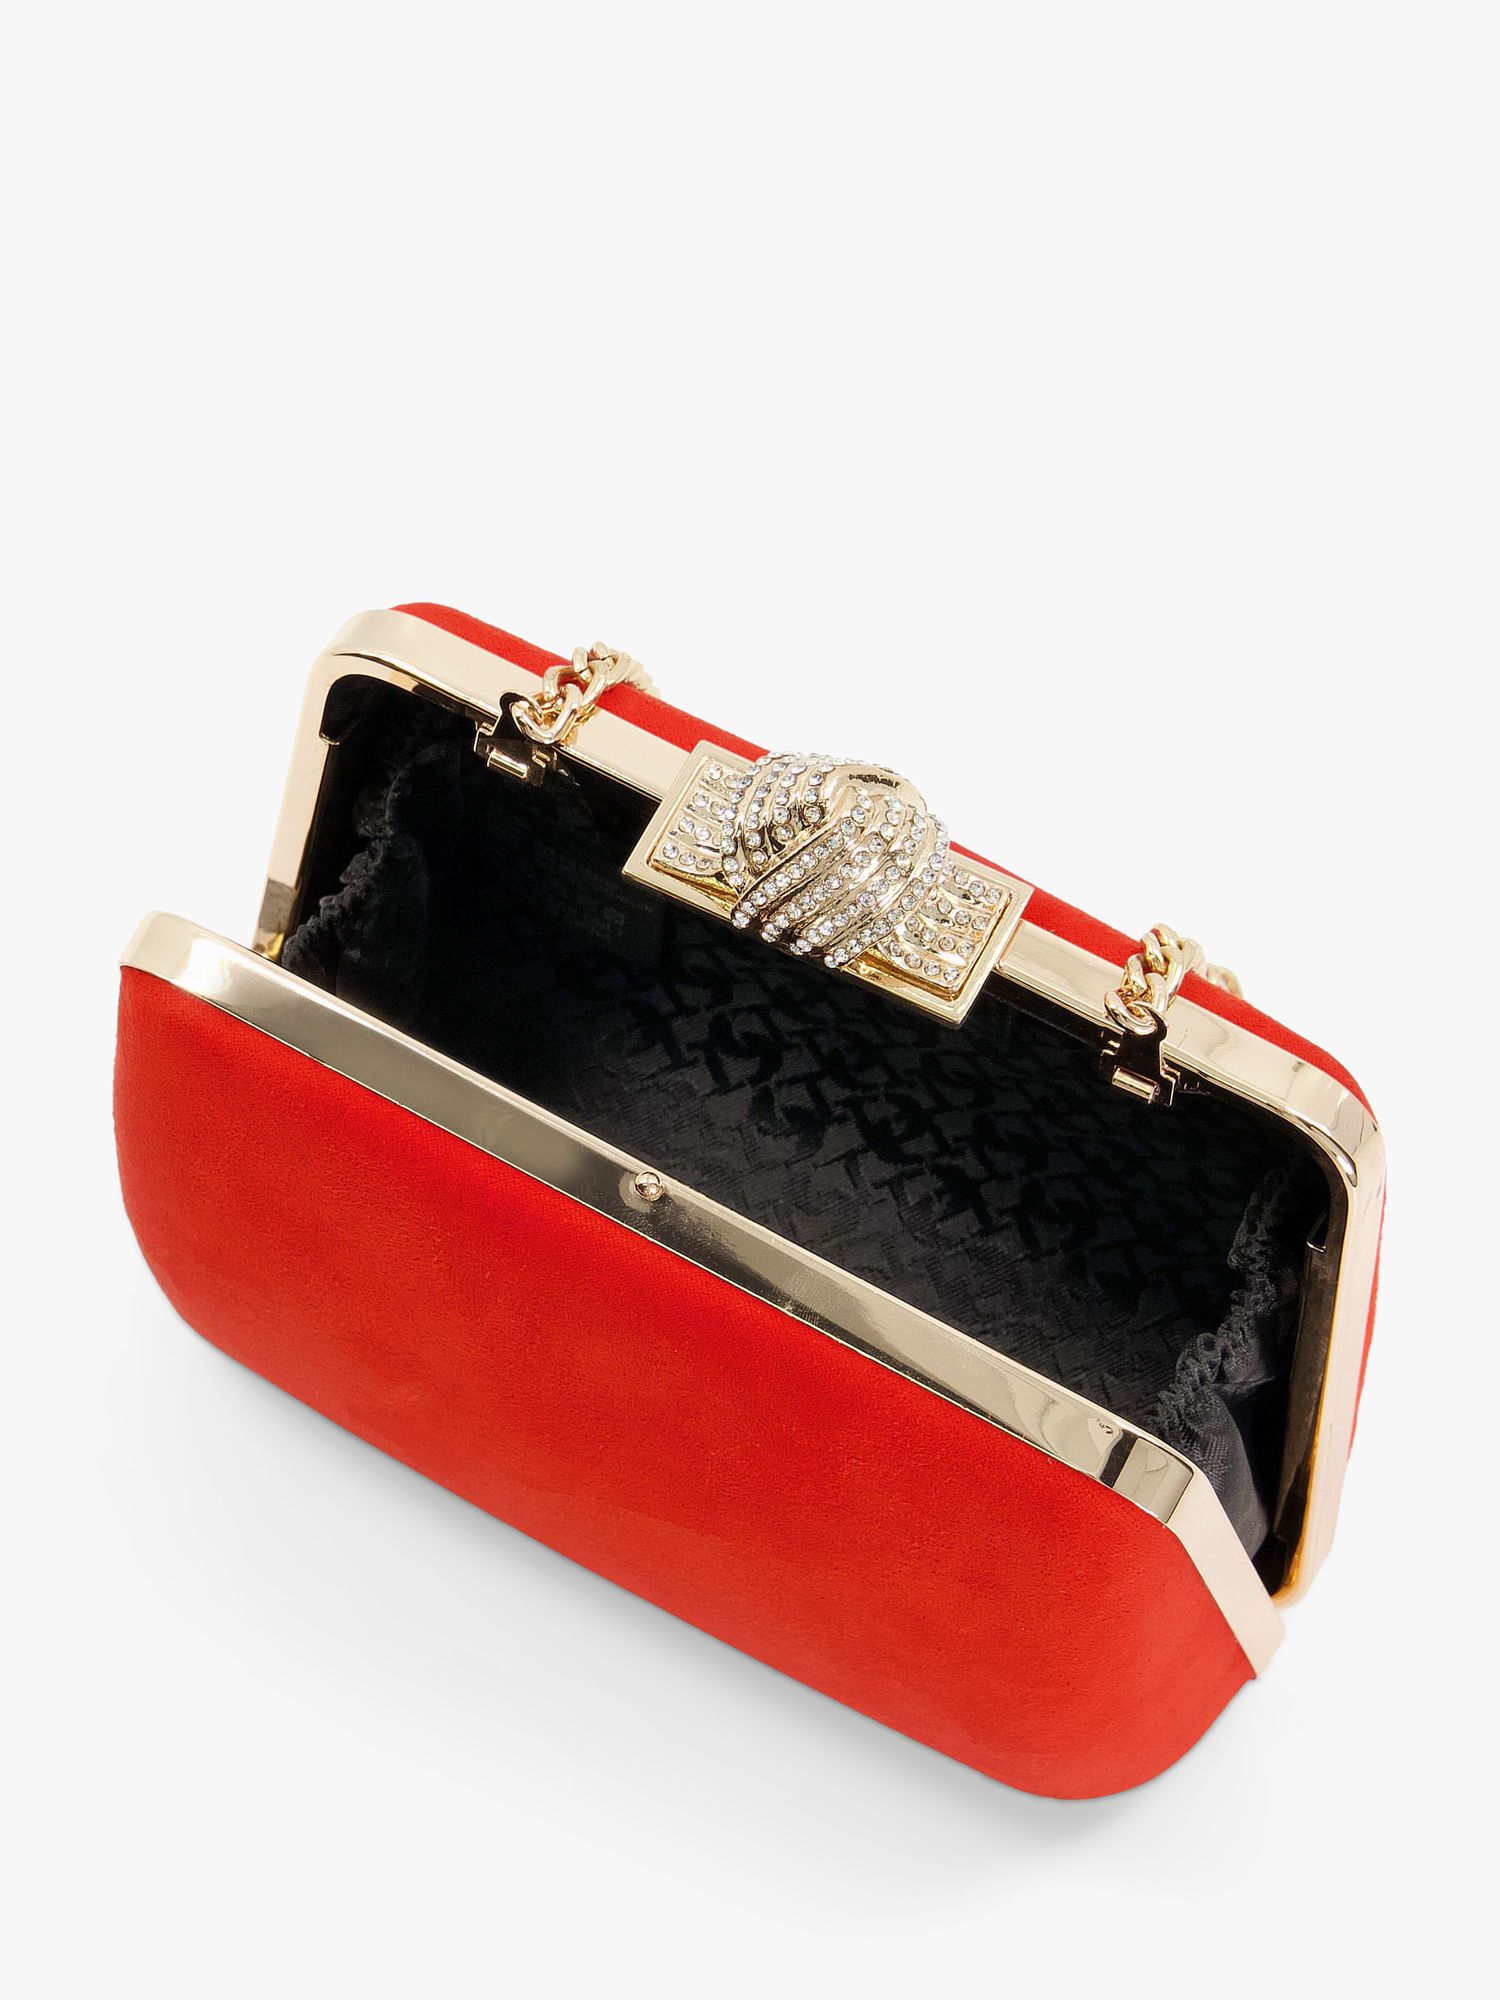 Dune Become Chain Strap Clutch Bag, Orange at John Lewis & Partners